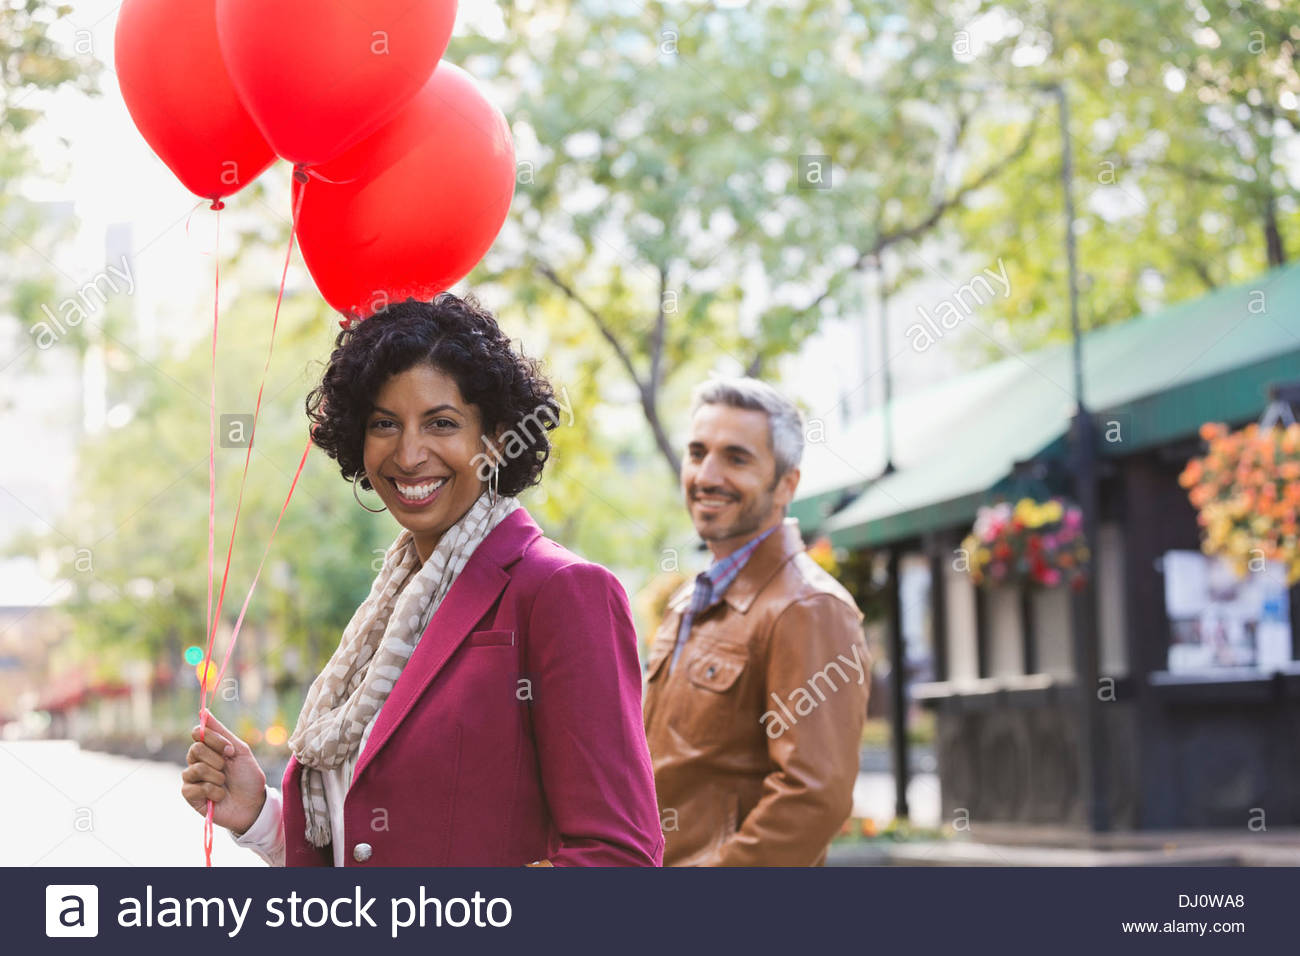 Portrait of happy woman holding red balloons outdoors Stock Photo